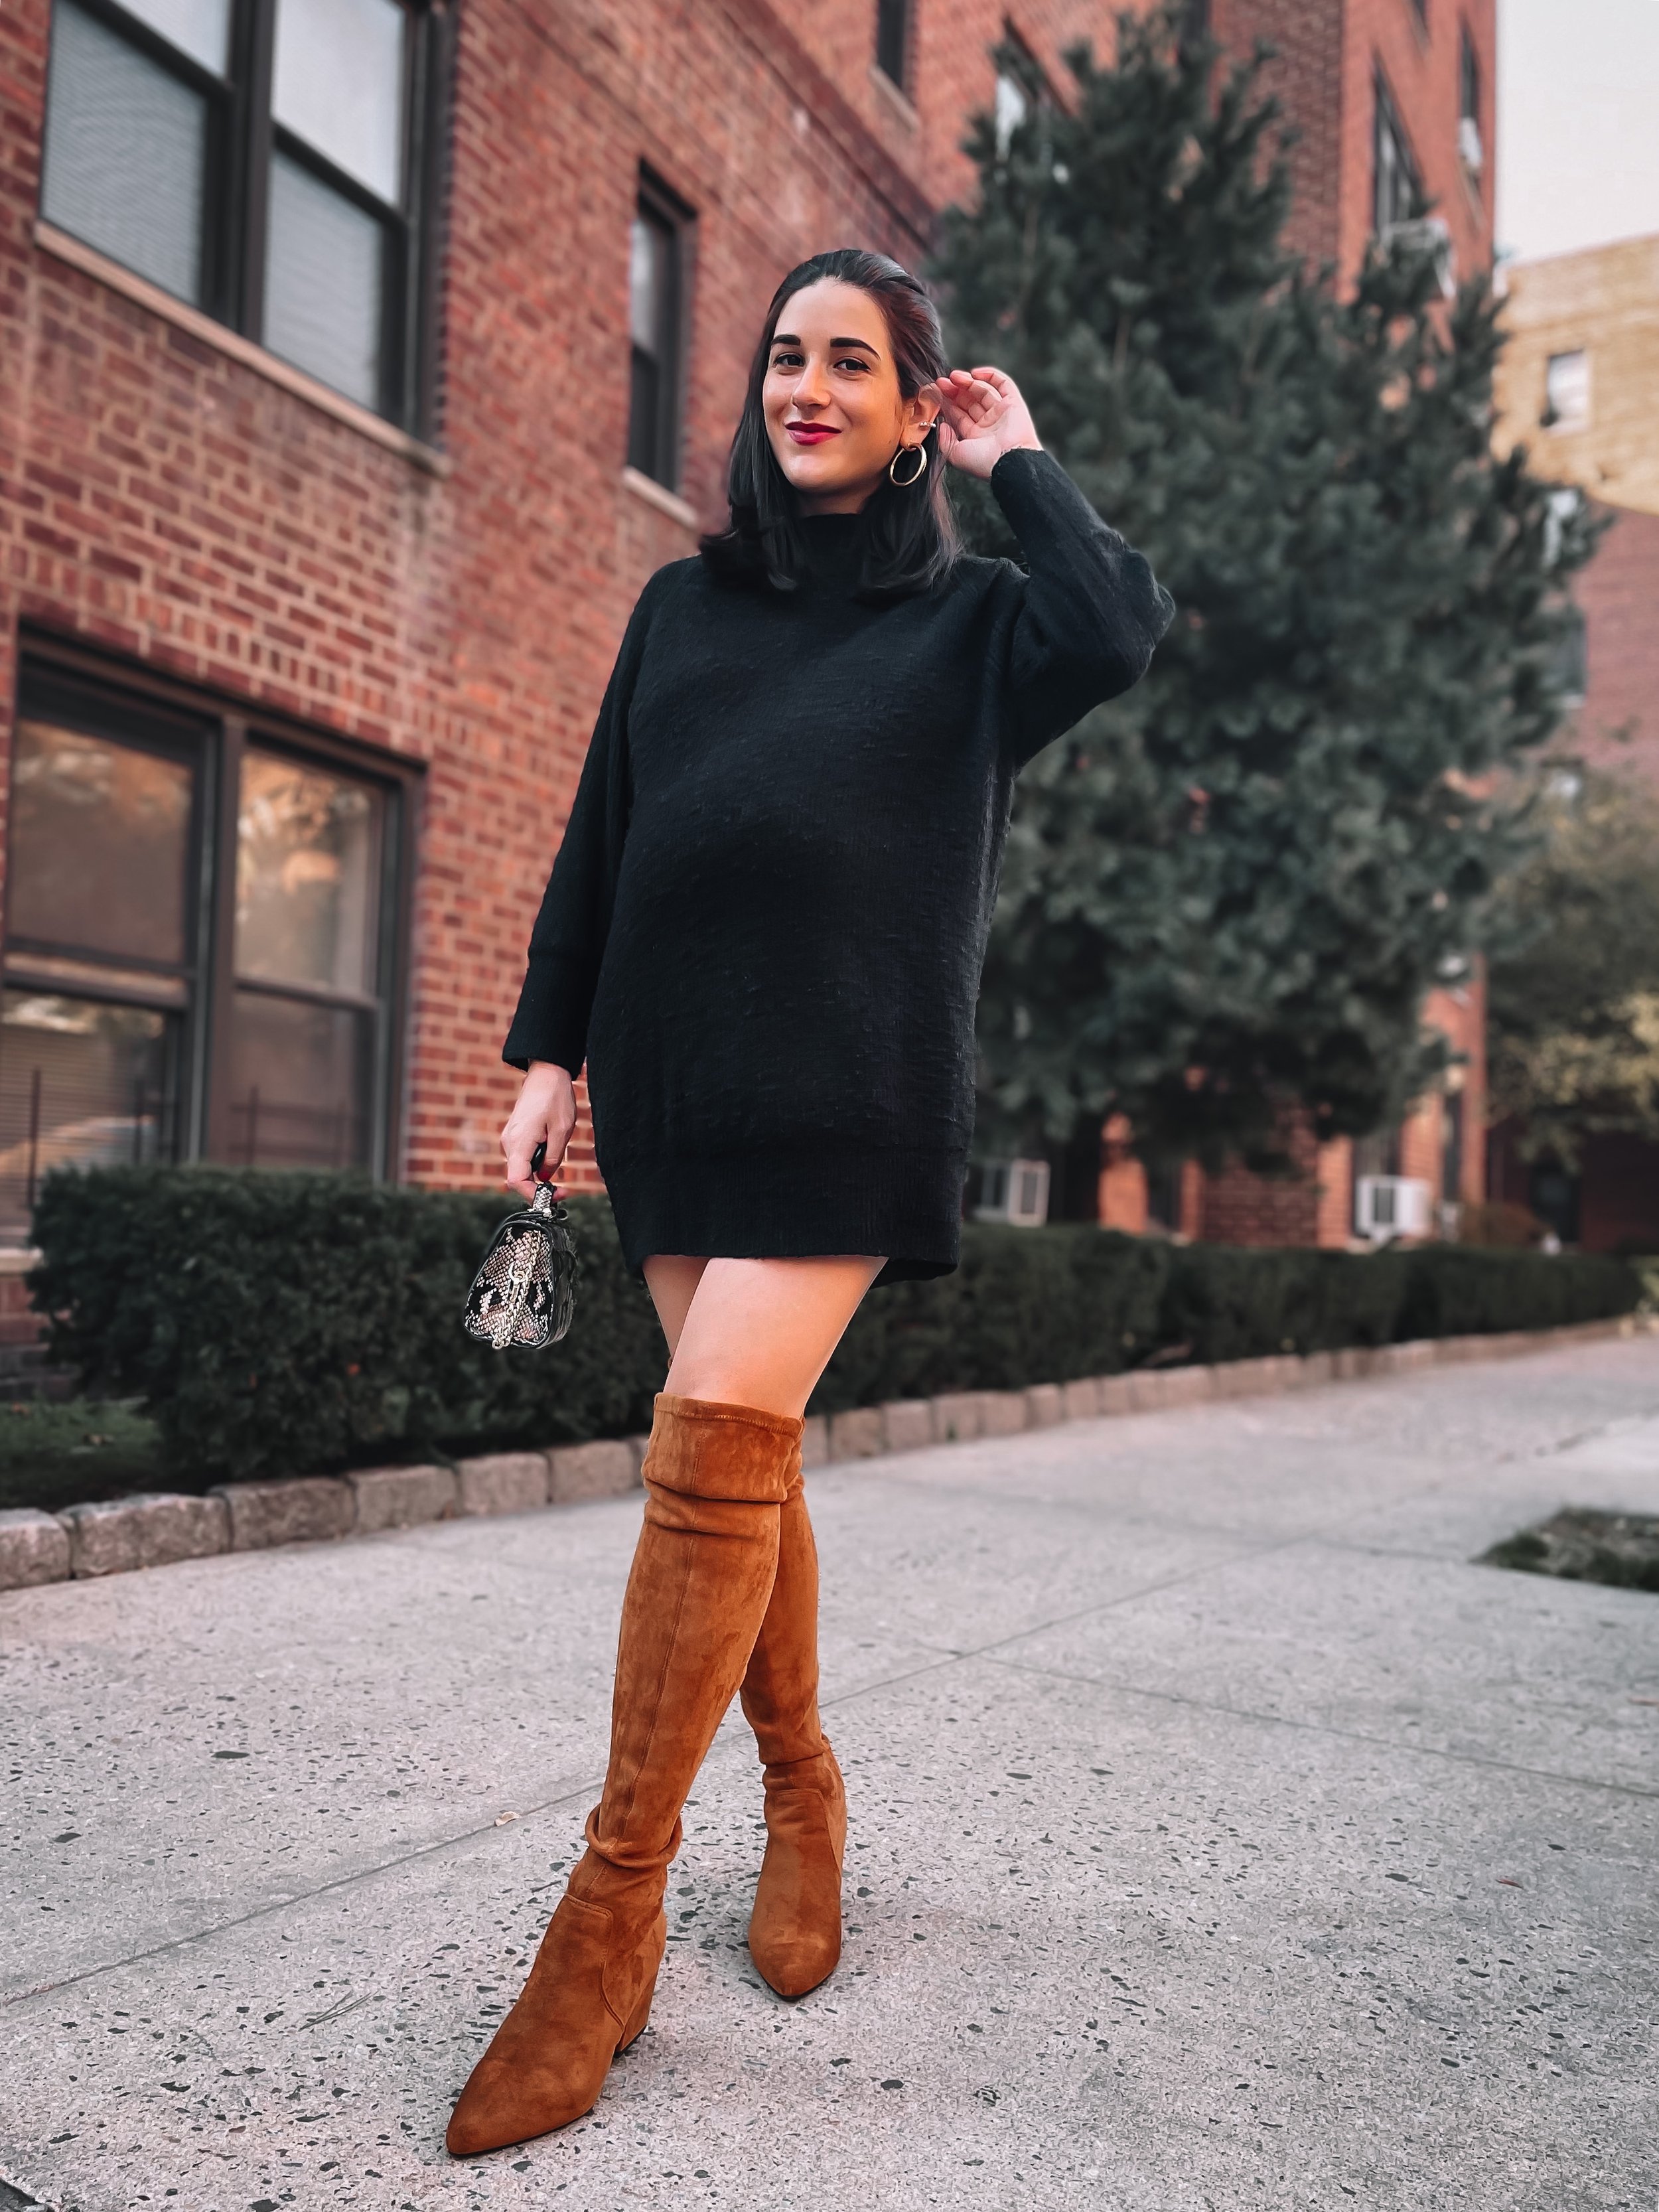 Black Sweater Dress Tan OTK Boots 39 Weeks Pregnant Esther Santer NYC Street Style Blogger Nordstrom Topshop Gold Hoop Earrings Over The Knee Boots Goodnight Macraoon Bump Friendly Pregnancy Fashion IVF Winter Strathberry Mini Bag  Women Expecting Mom.JPG